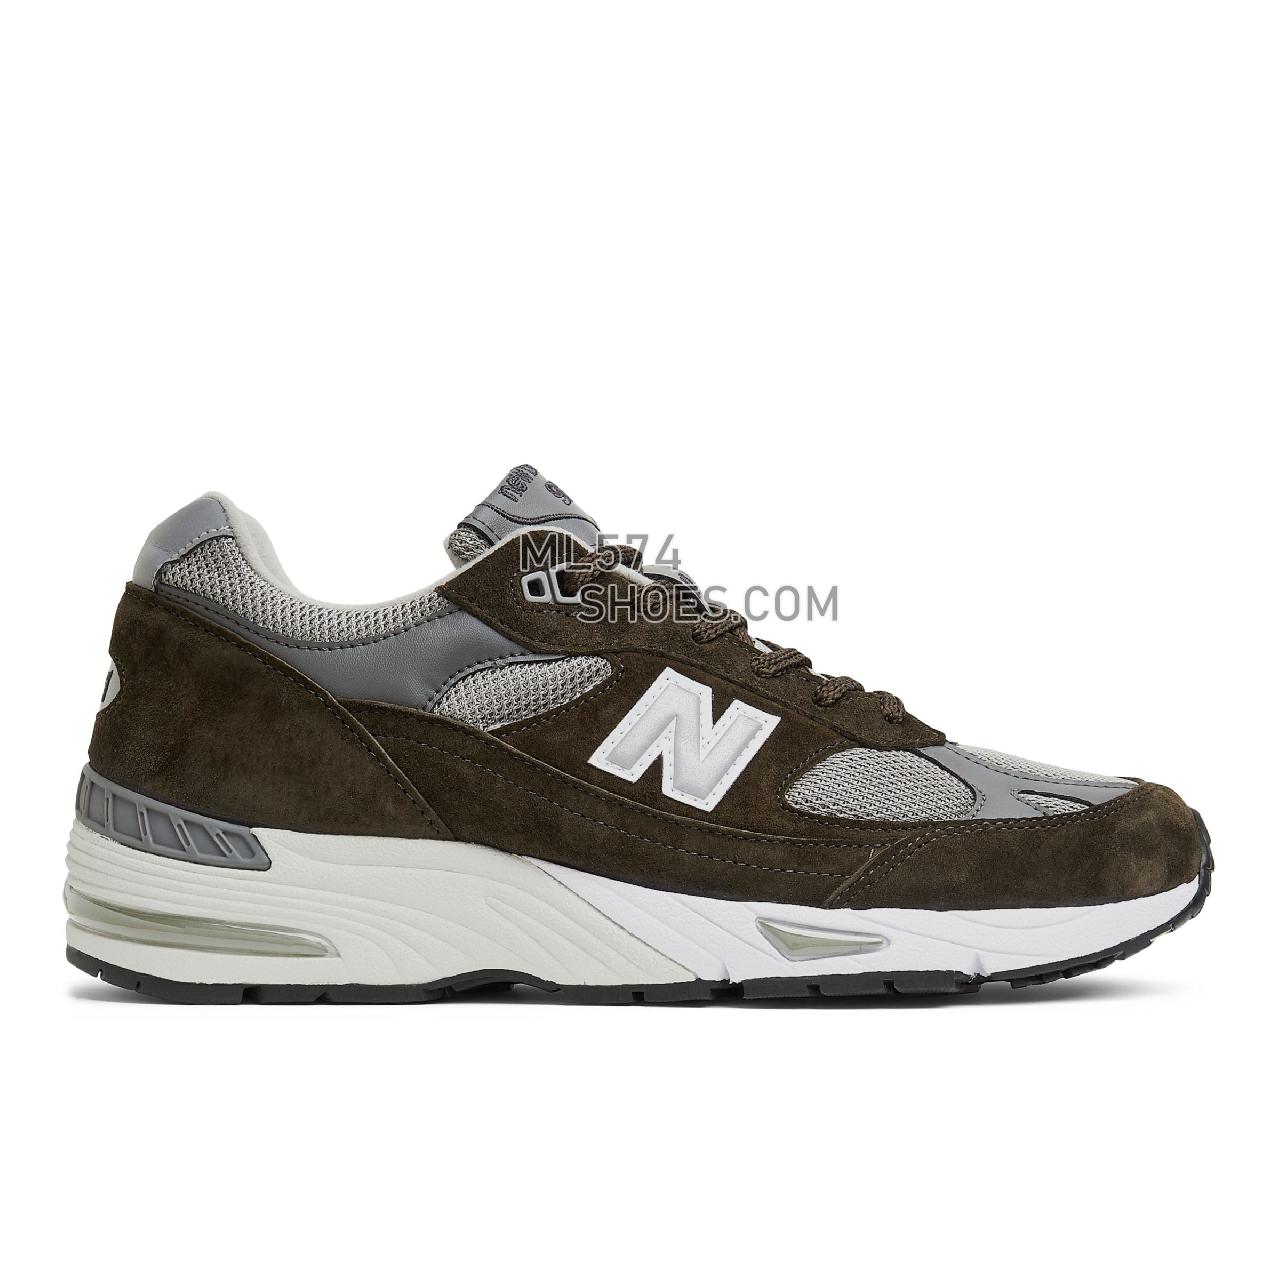 New Balance MADE in UK 991 - Men's Made in USA And UK Sneakers - Dark Green with Grey and White - M991OLG